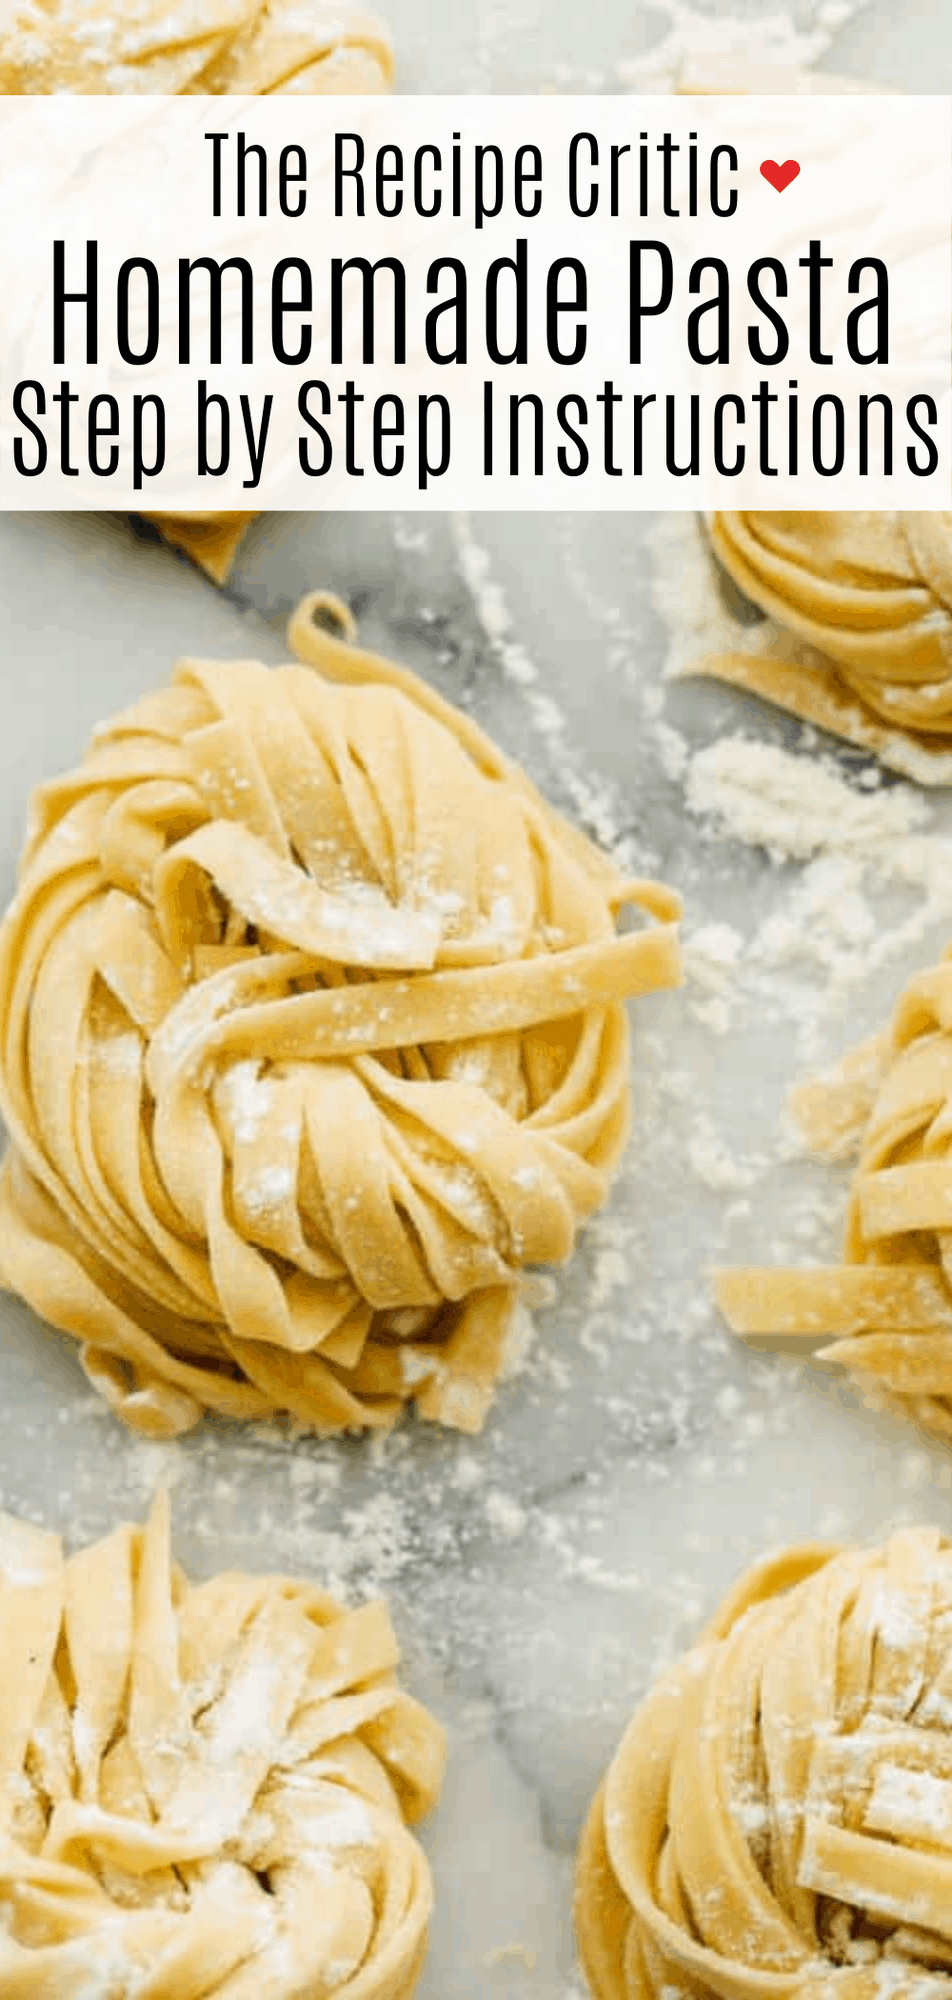 How to Make Homemade Pasta Step by Step | The Recipe Critic